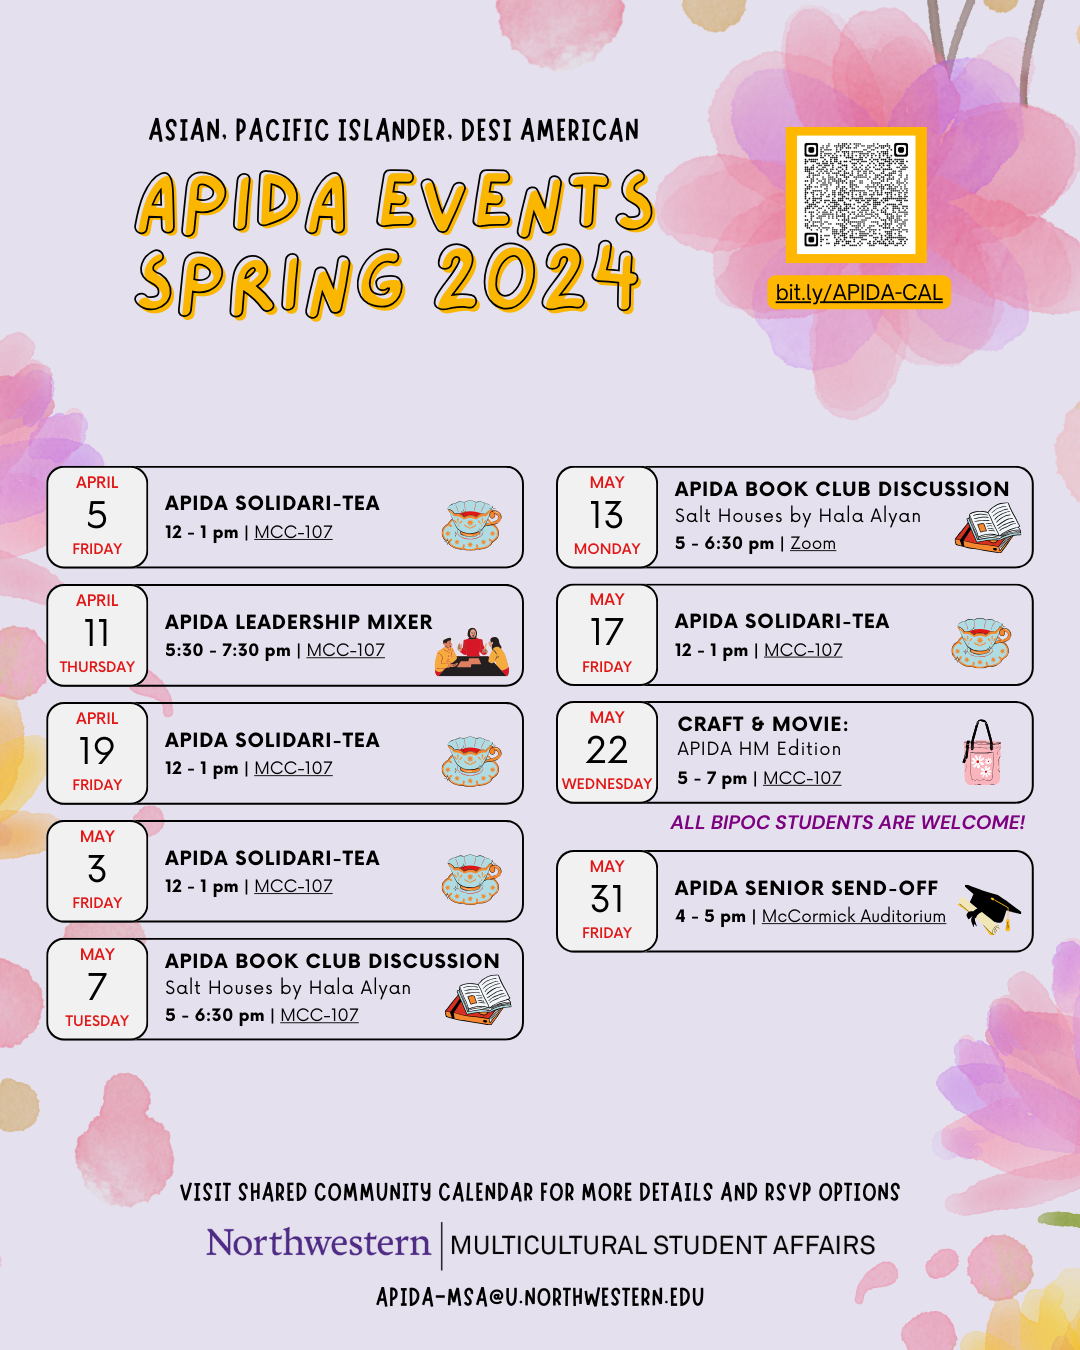 Flyer for APIDA Evetns with Multicultural Student Affairs